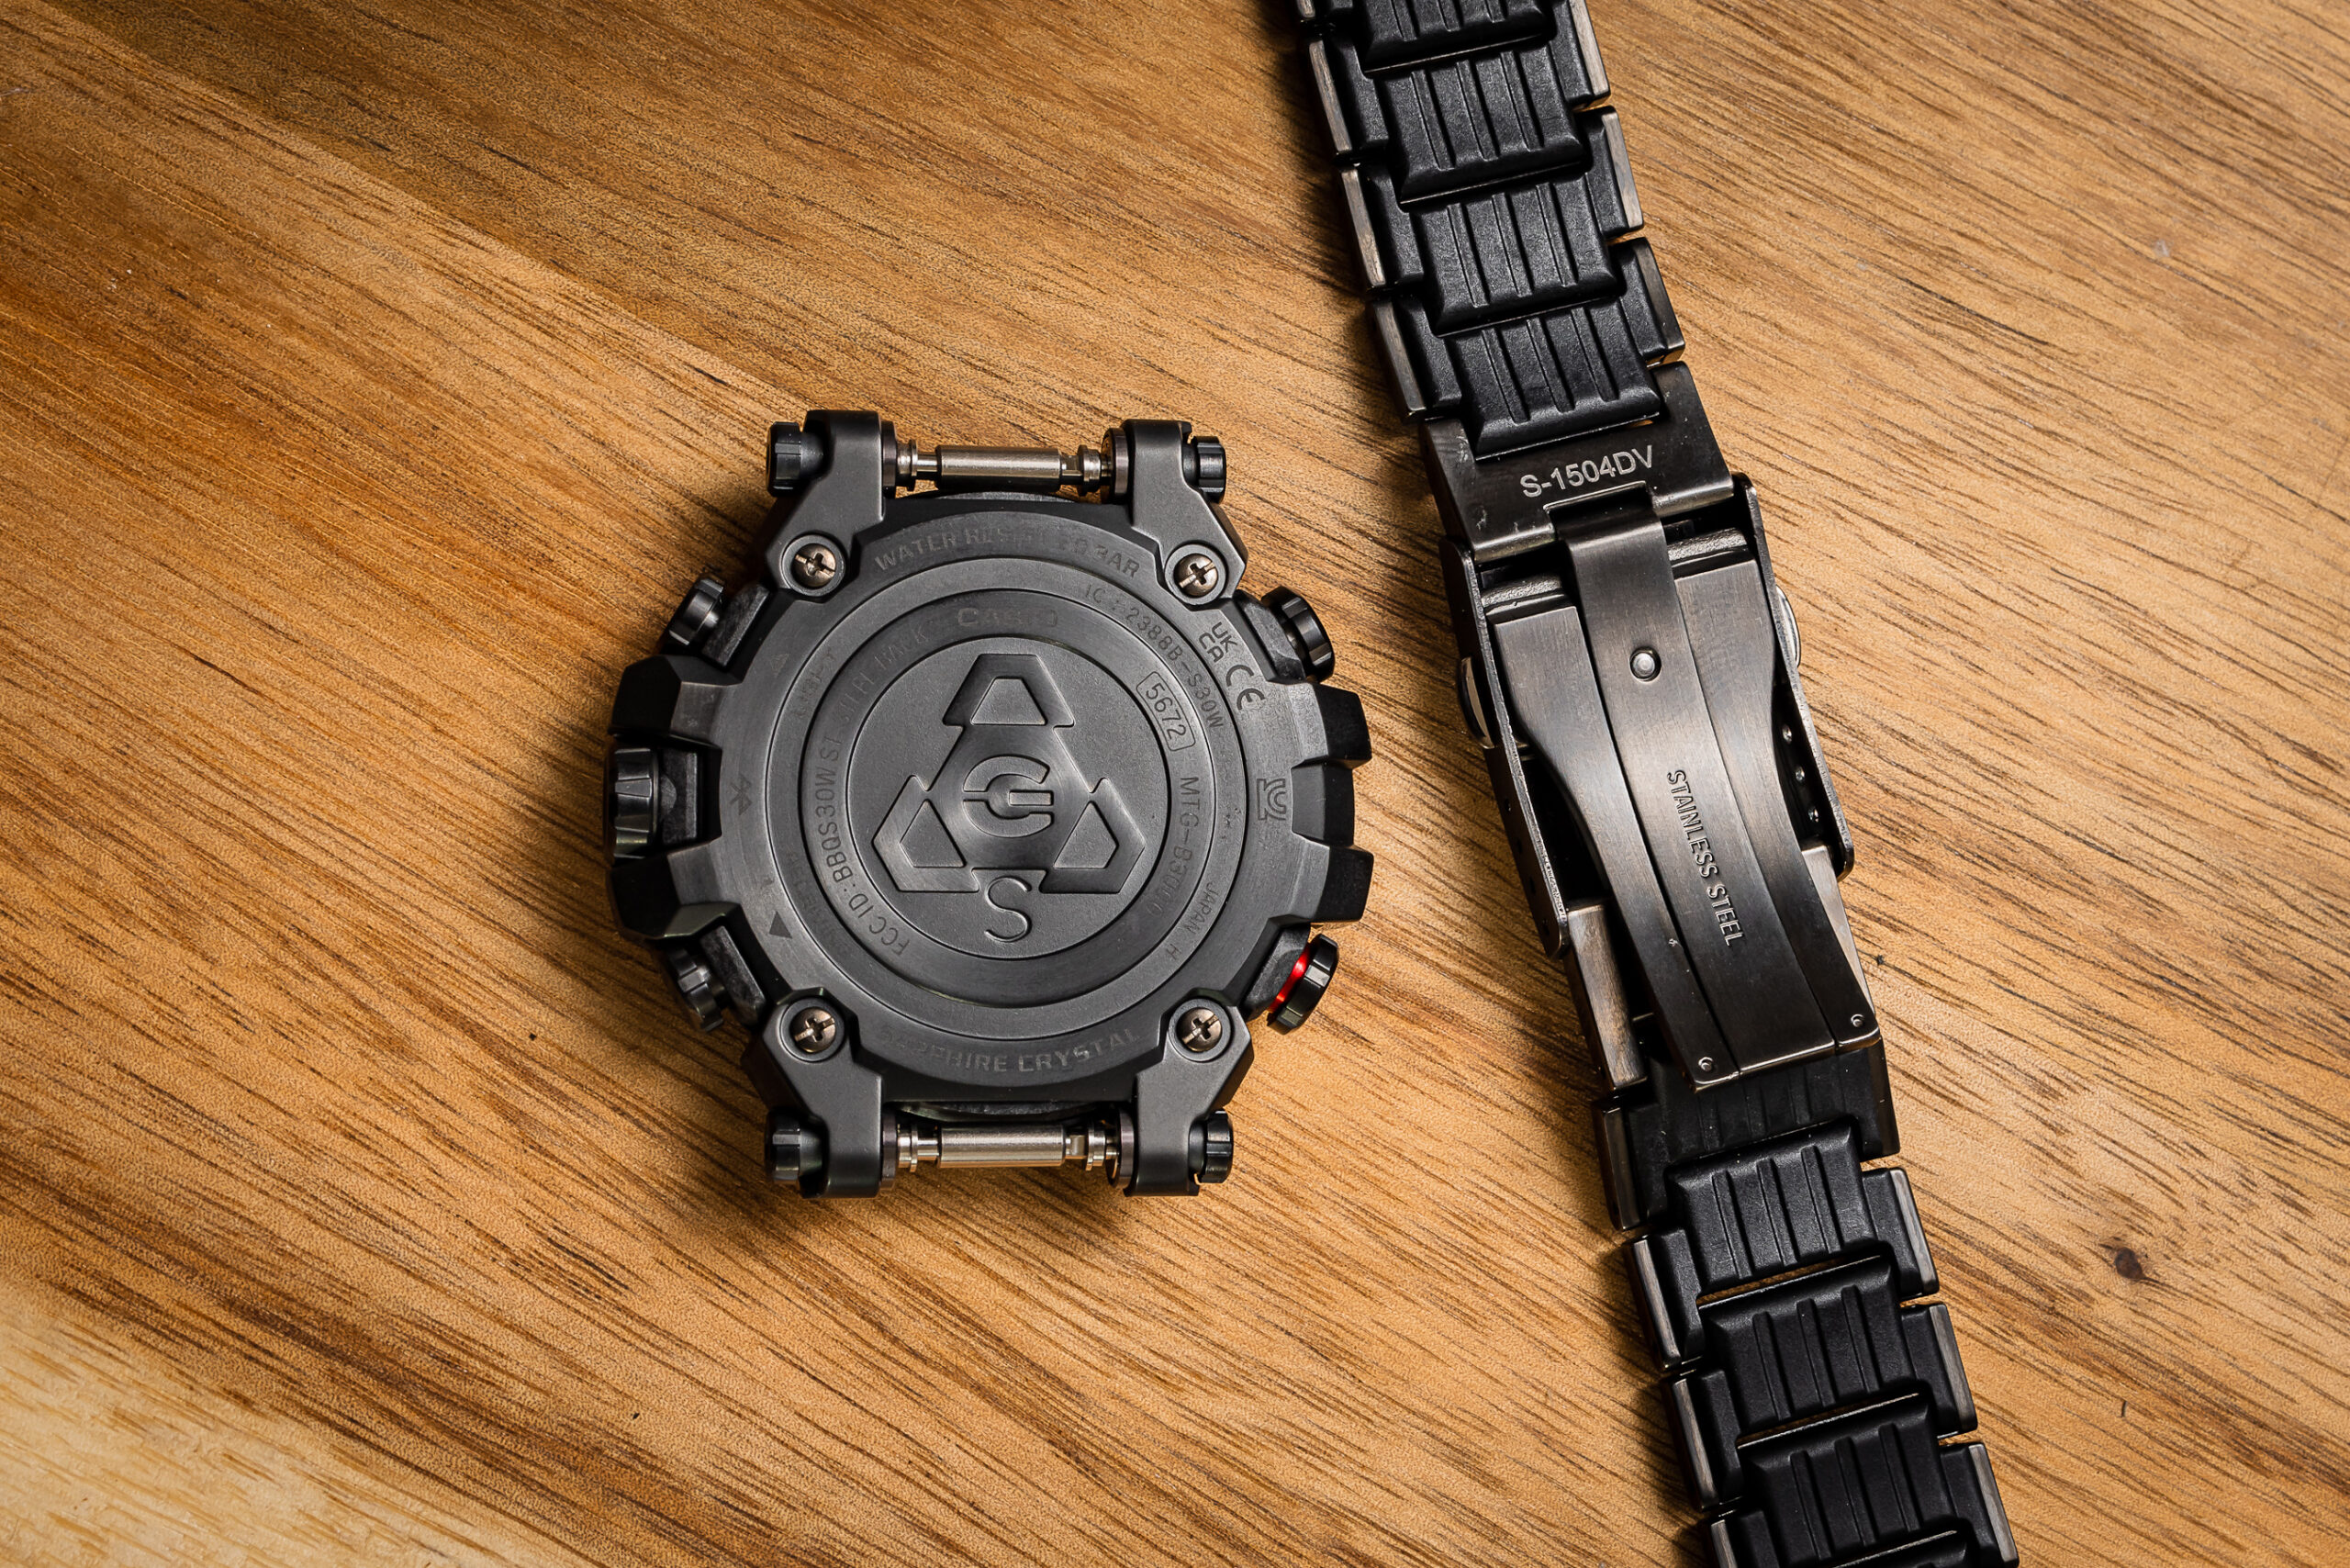 G Shock S Mtgb3000 Watch Is The Brand S Thinnest To Date Ablogtowatch